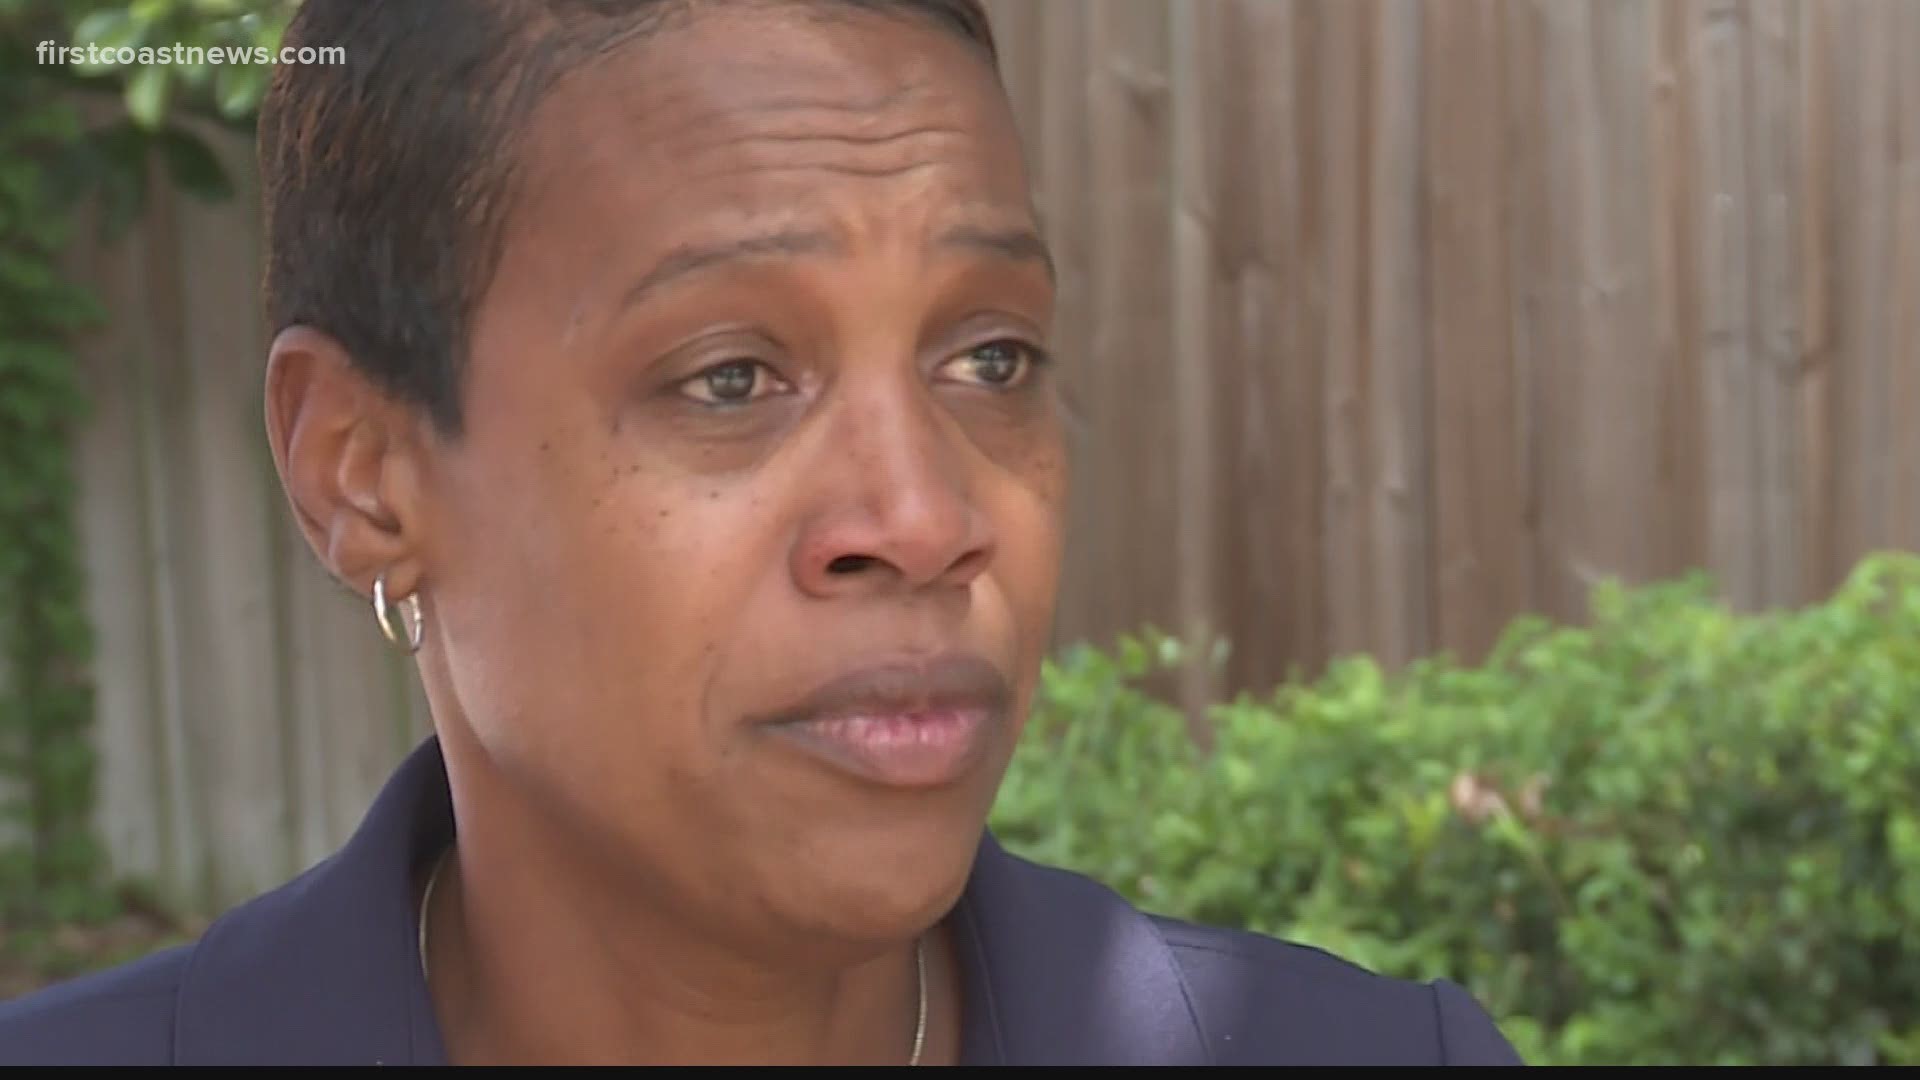 Jaden Perkins' mom says the officers who reportedly shot her son "had to do what they had to do, and I appreciate it."